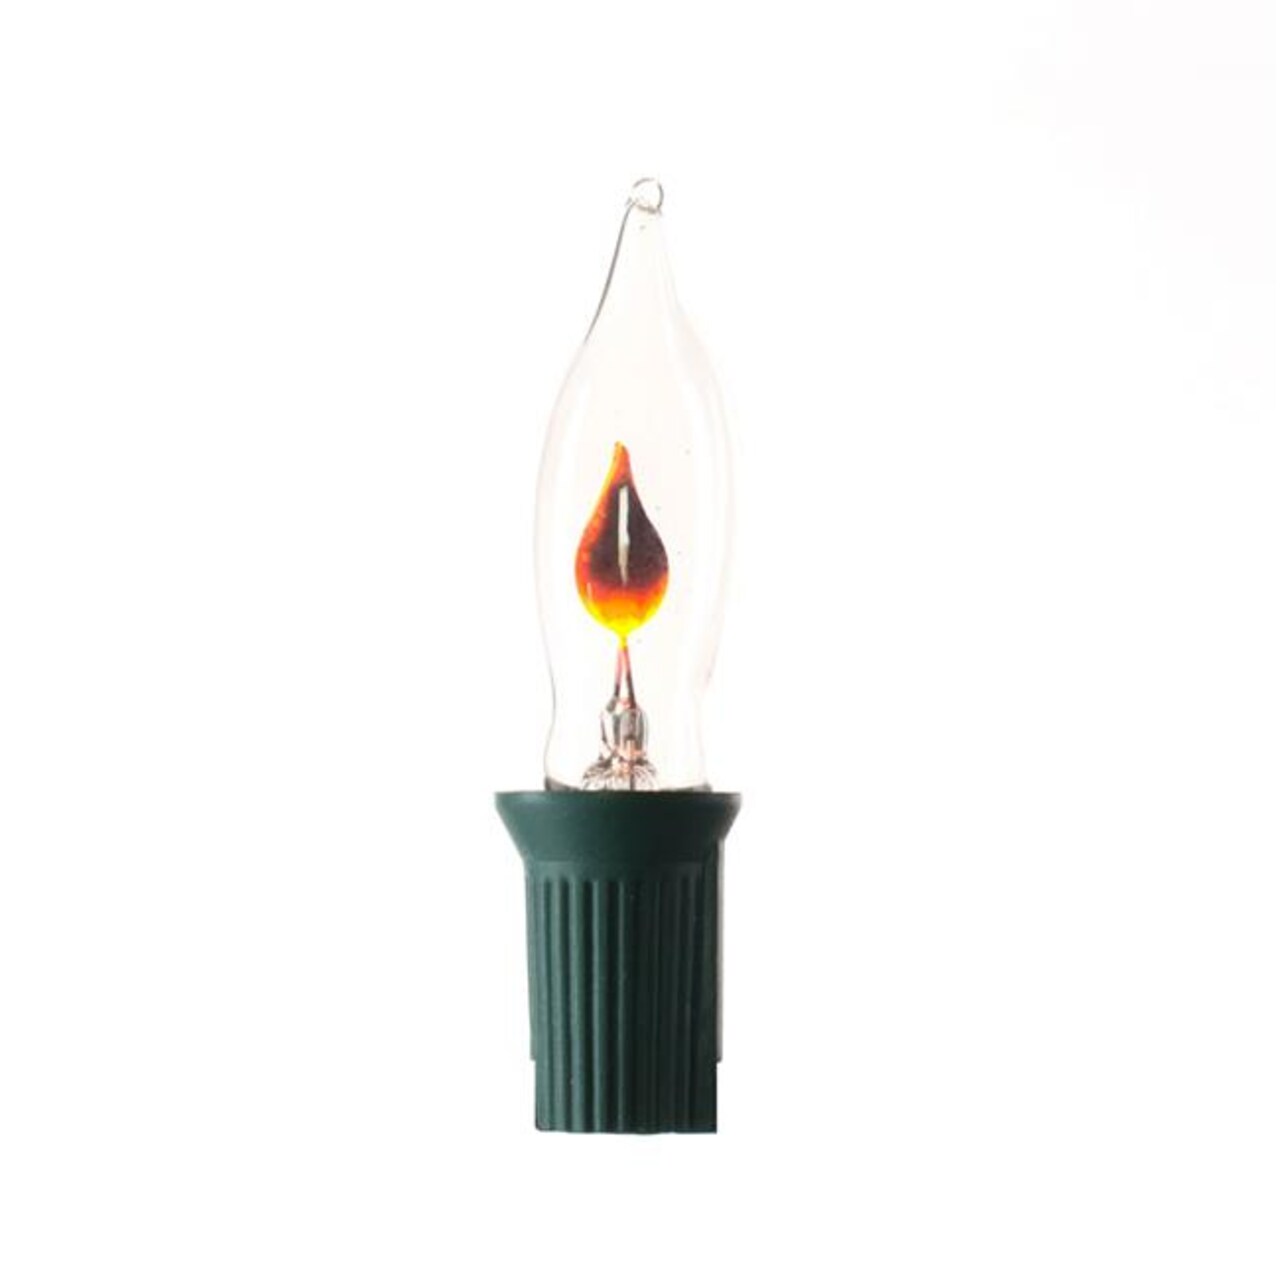 Flicker End Connecting Green Wire 24 in. Spacing Light Set with Clear Flame Lights